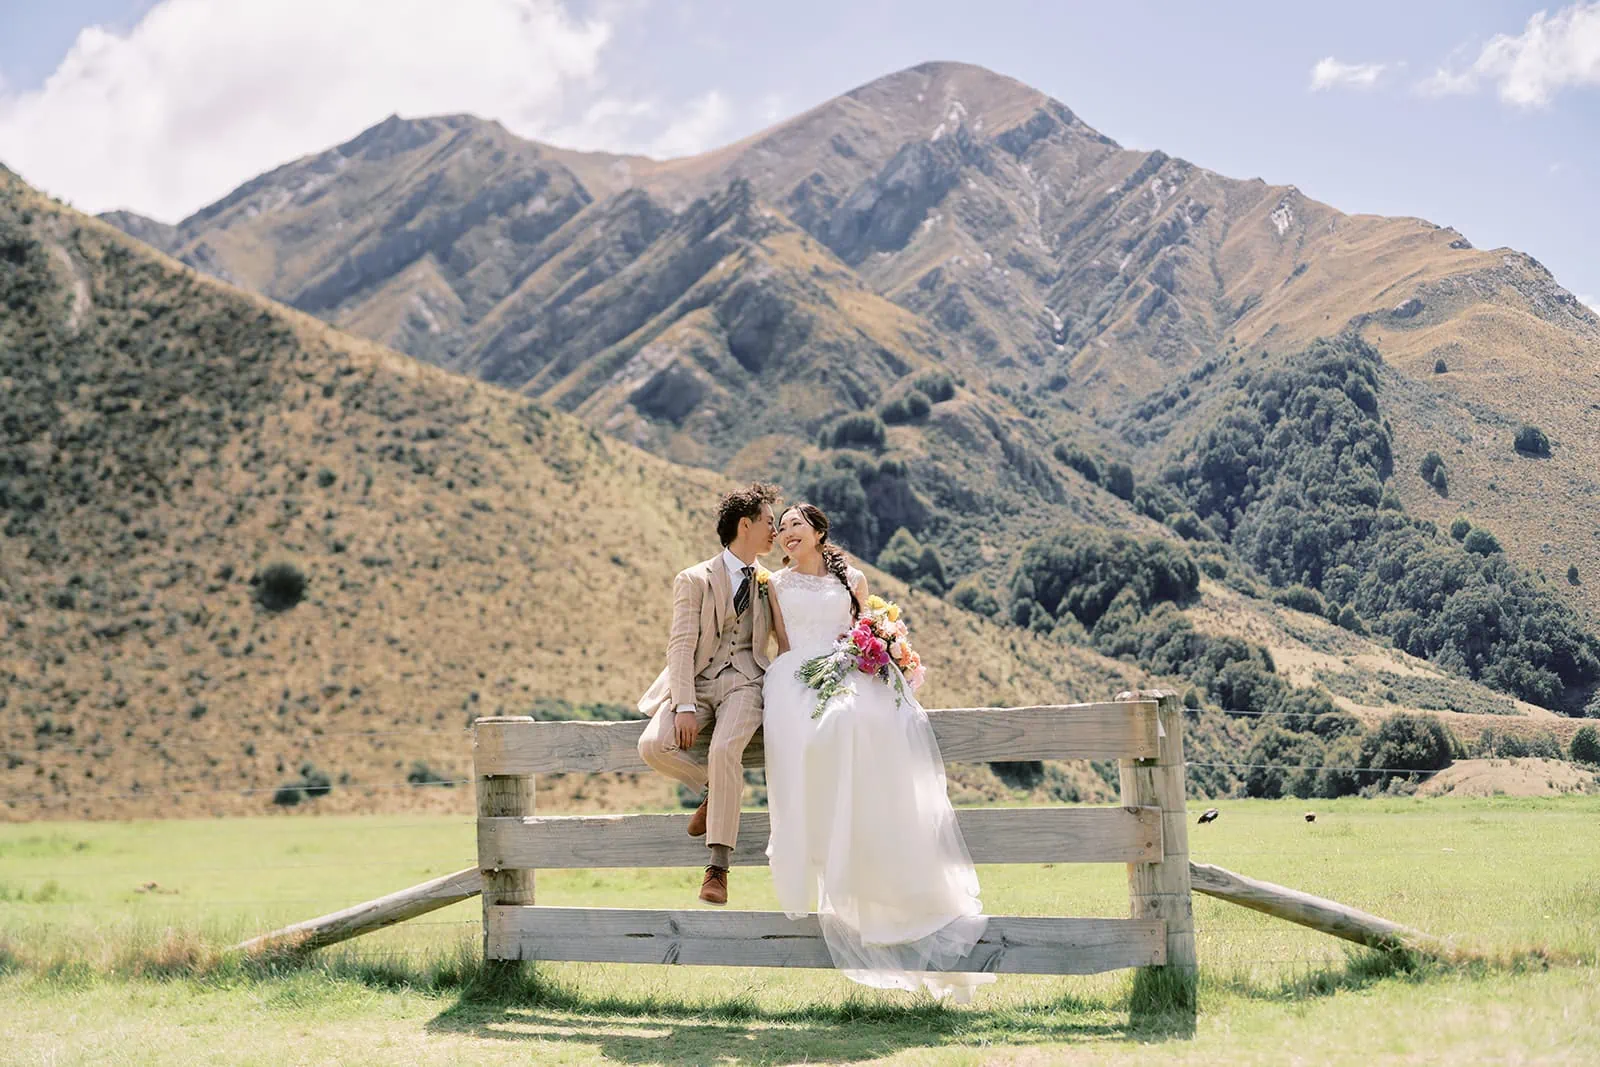 Queenstown Elopement Heli Wedding Photographer クイーンズタウン結婚式 | Saki & Taisei enjoying a Queenstown Heli Pre-Wedding Photoshoot on a fence in a field with mountains in the background.